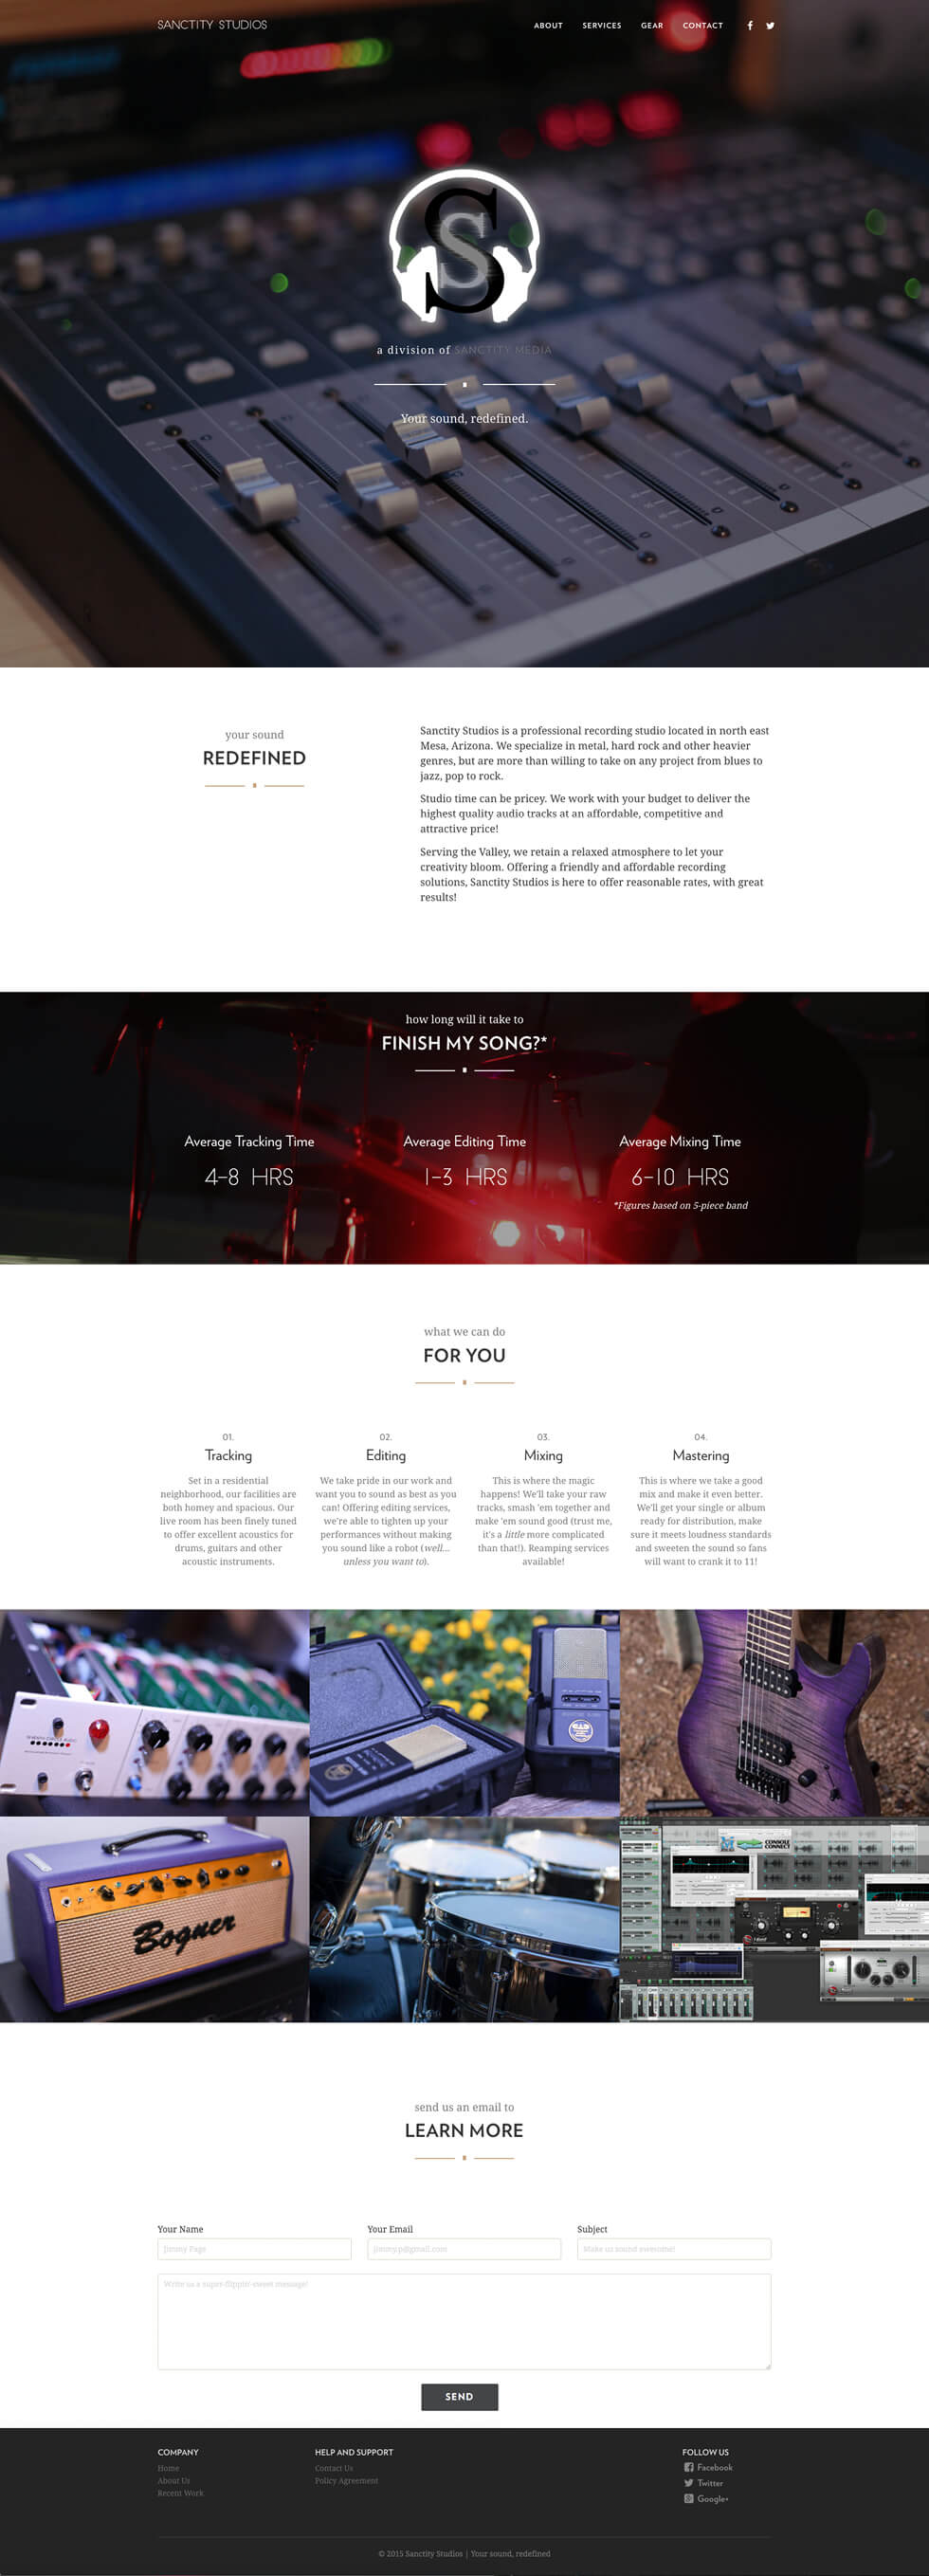 Website one-page redesign